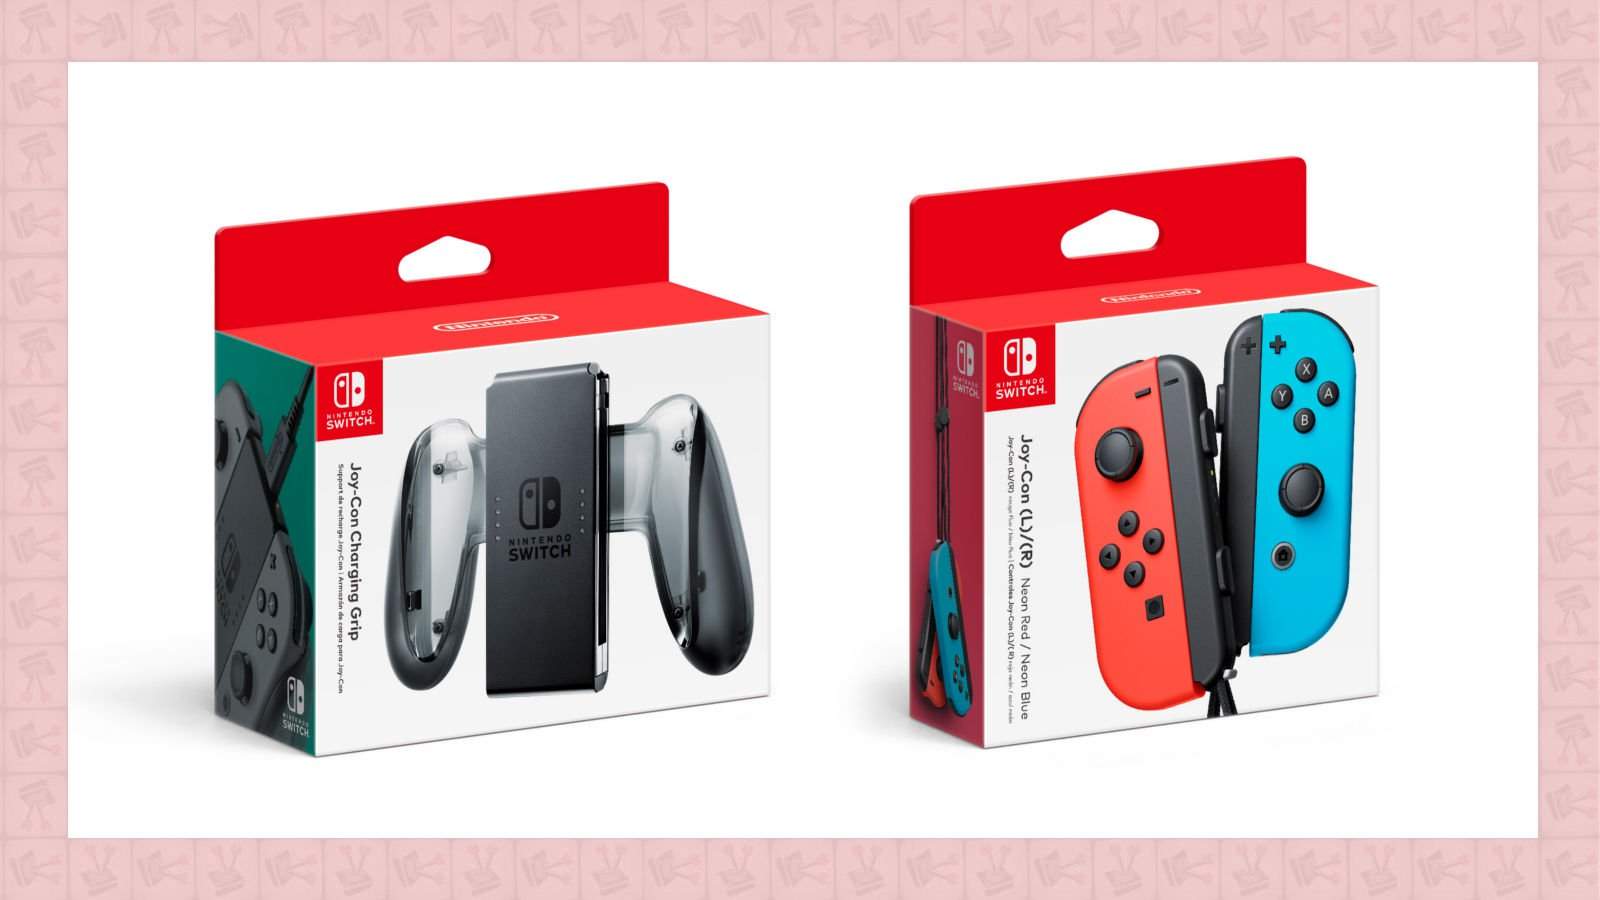 Vamers - FYI - Video Gaming - Nintendo - Nintendo Switch comes with a pair of crazy Joy-Con controllers - 01